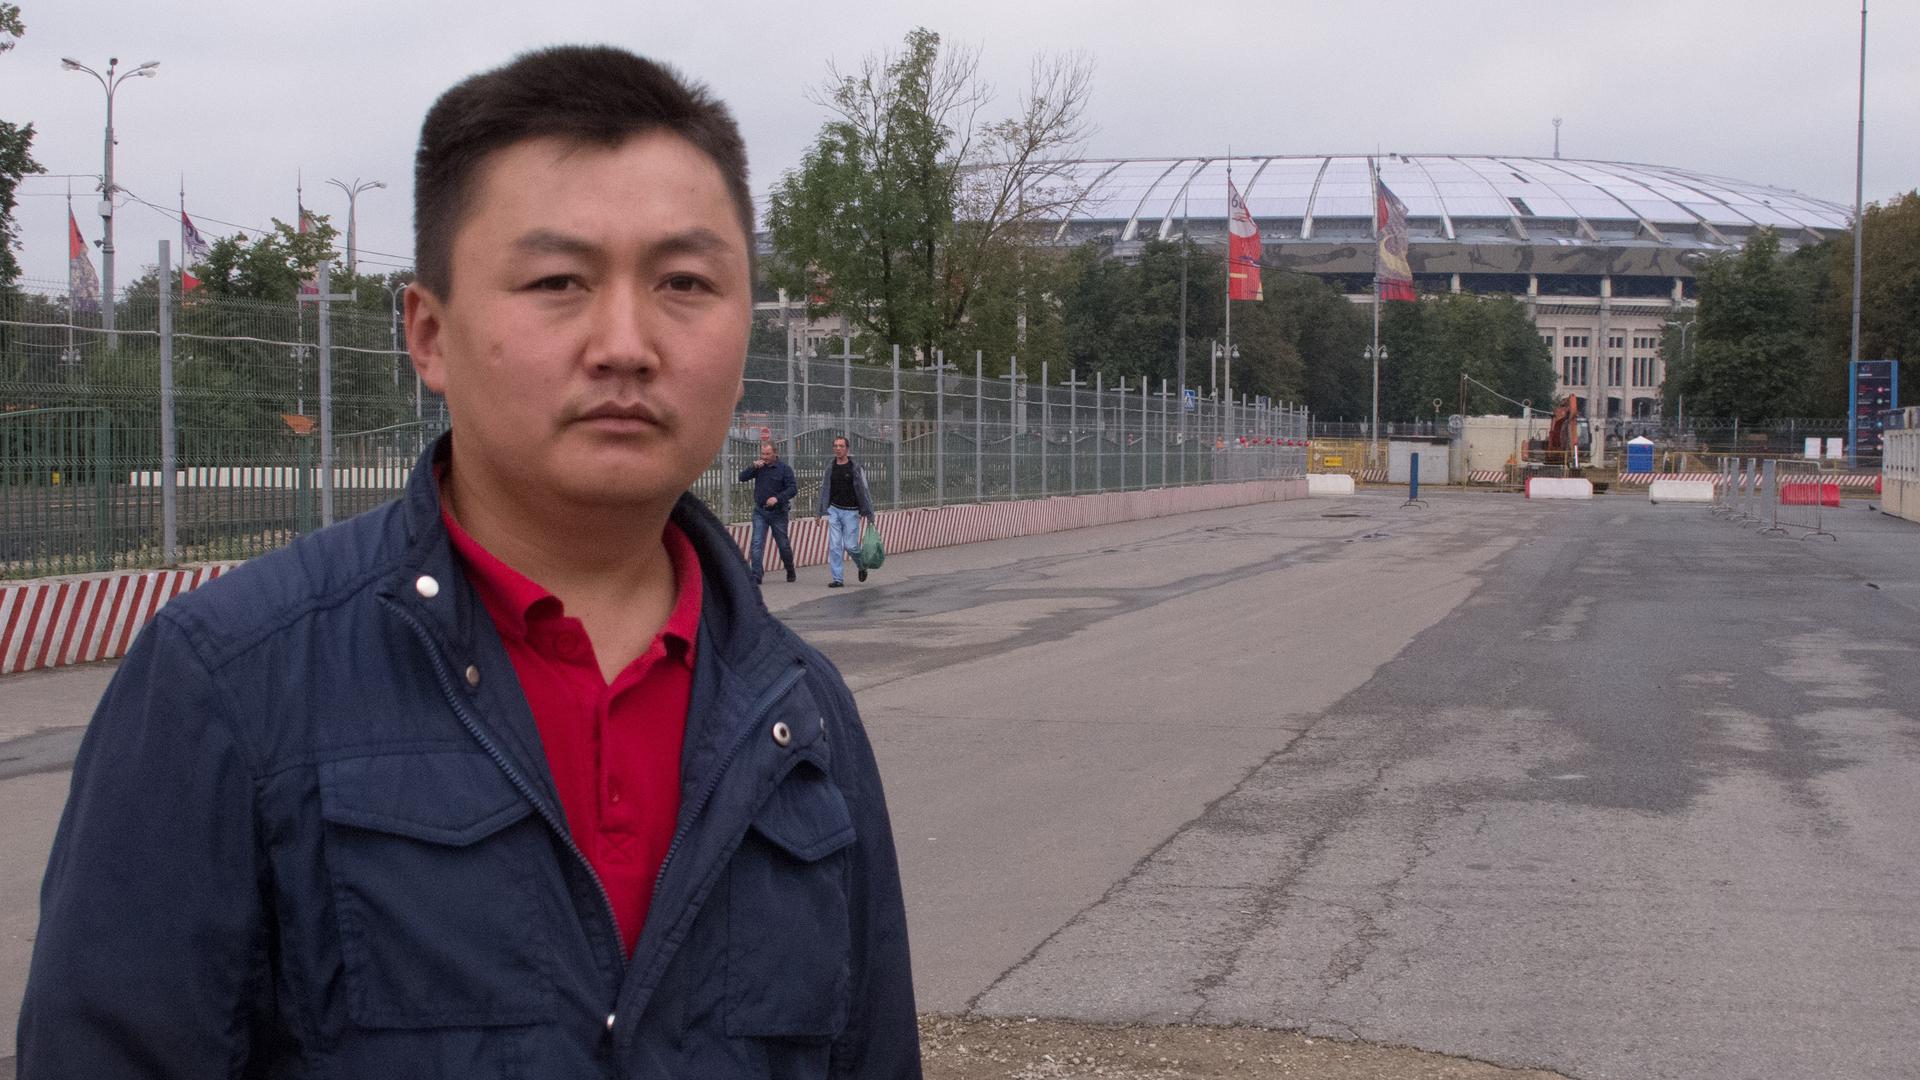 Eric Dzhakhpevych, 31, left Kyrgyzstan to work at Luzhniki Stadium in Moscow where fans will watch the opening match of the 2018 World Cup. Dzhakhpevych is one of many migrant workers who say they were victims of wage theft at Russia’s World Cup sites.